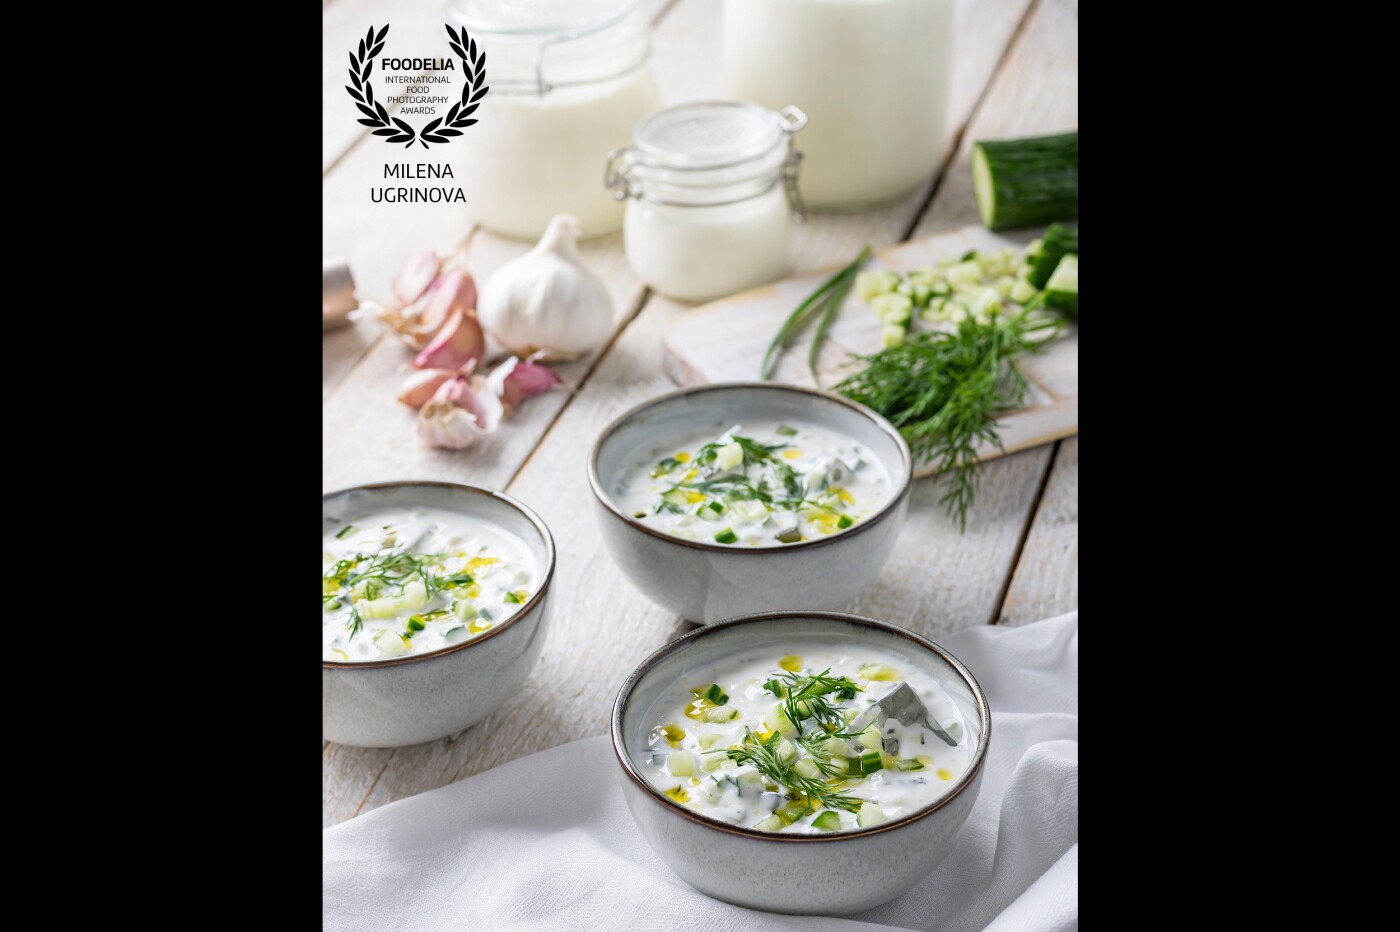 Have you tried the Bulgarian Tarator? It's a very simple and refreshing cold raw soup made of yoghurt, cucumber, dill, garlic, olive oil, and if you like, you can add some walnuts. The main ingredient is the Bulgarian yoghurt which is thick, not sweet, and combines perfectly with a pinch of salt. You'll need to add some water to turn it into a soup. If you know Tzatziki, yes, it's similar, but never the same. In the photo, you can notice all the ingredient for Tarator alongside my homemade yoghurt. Served with some ice is perfect for the hot summer.